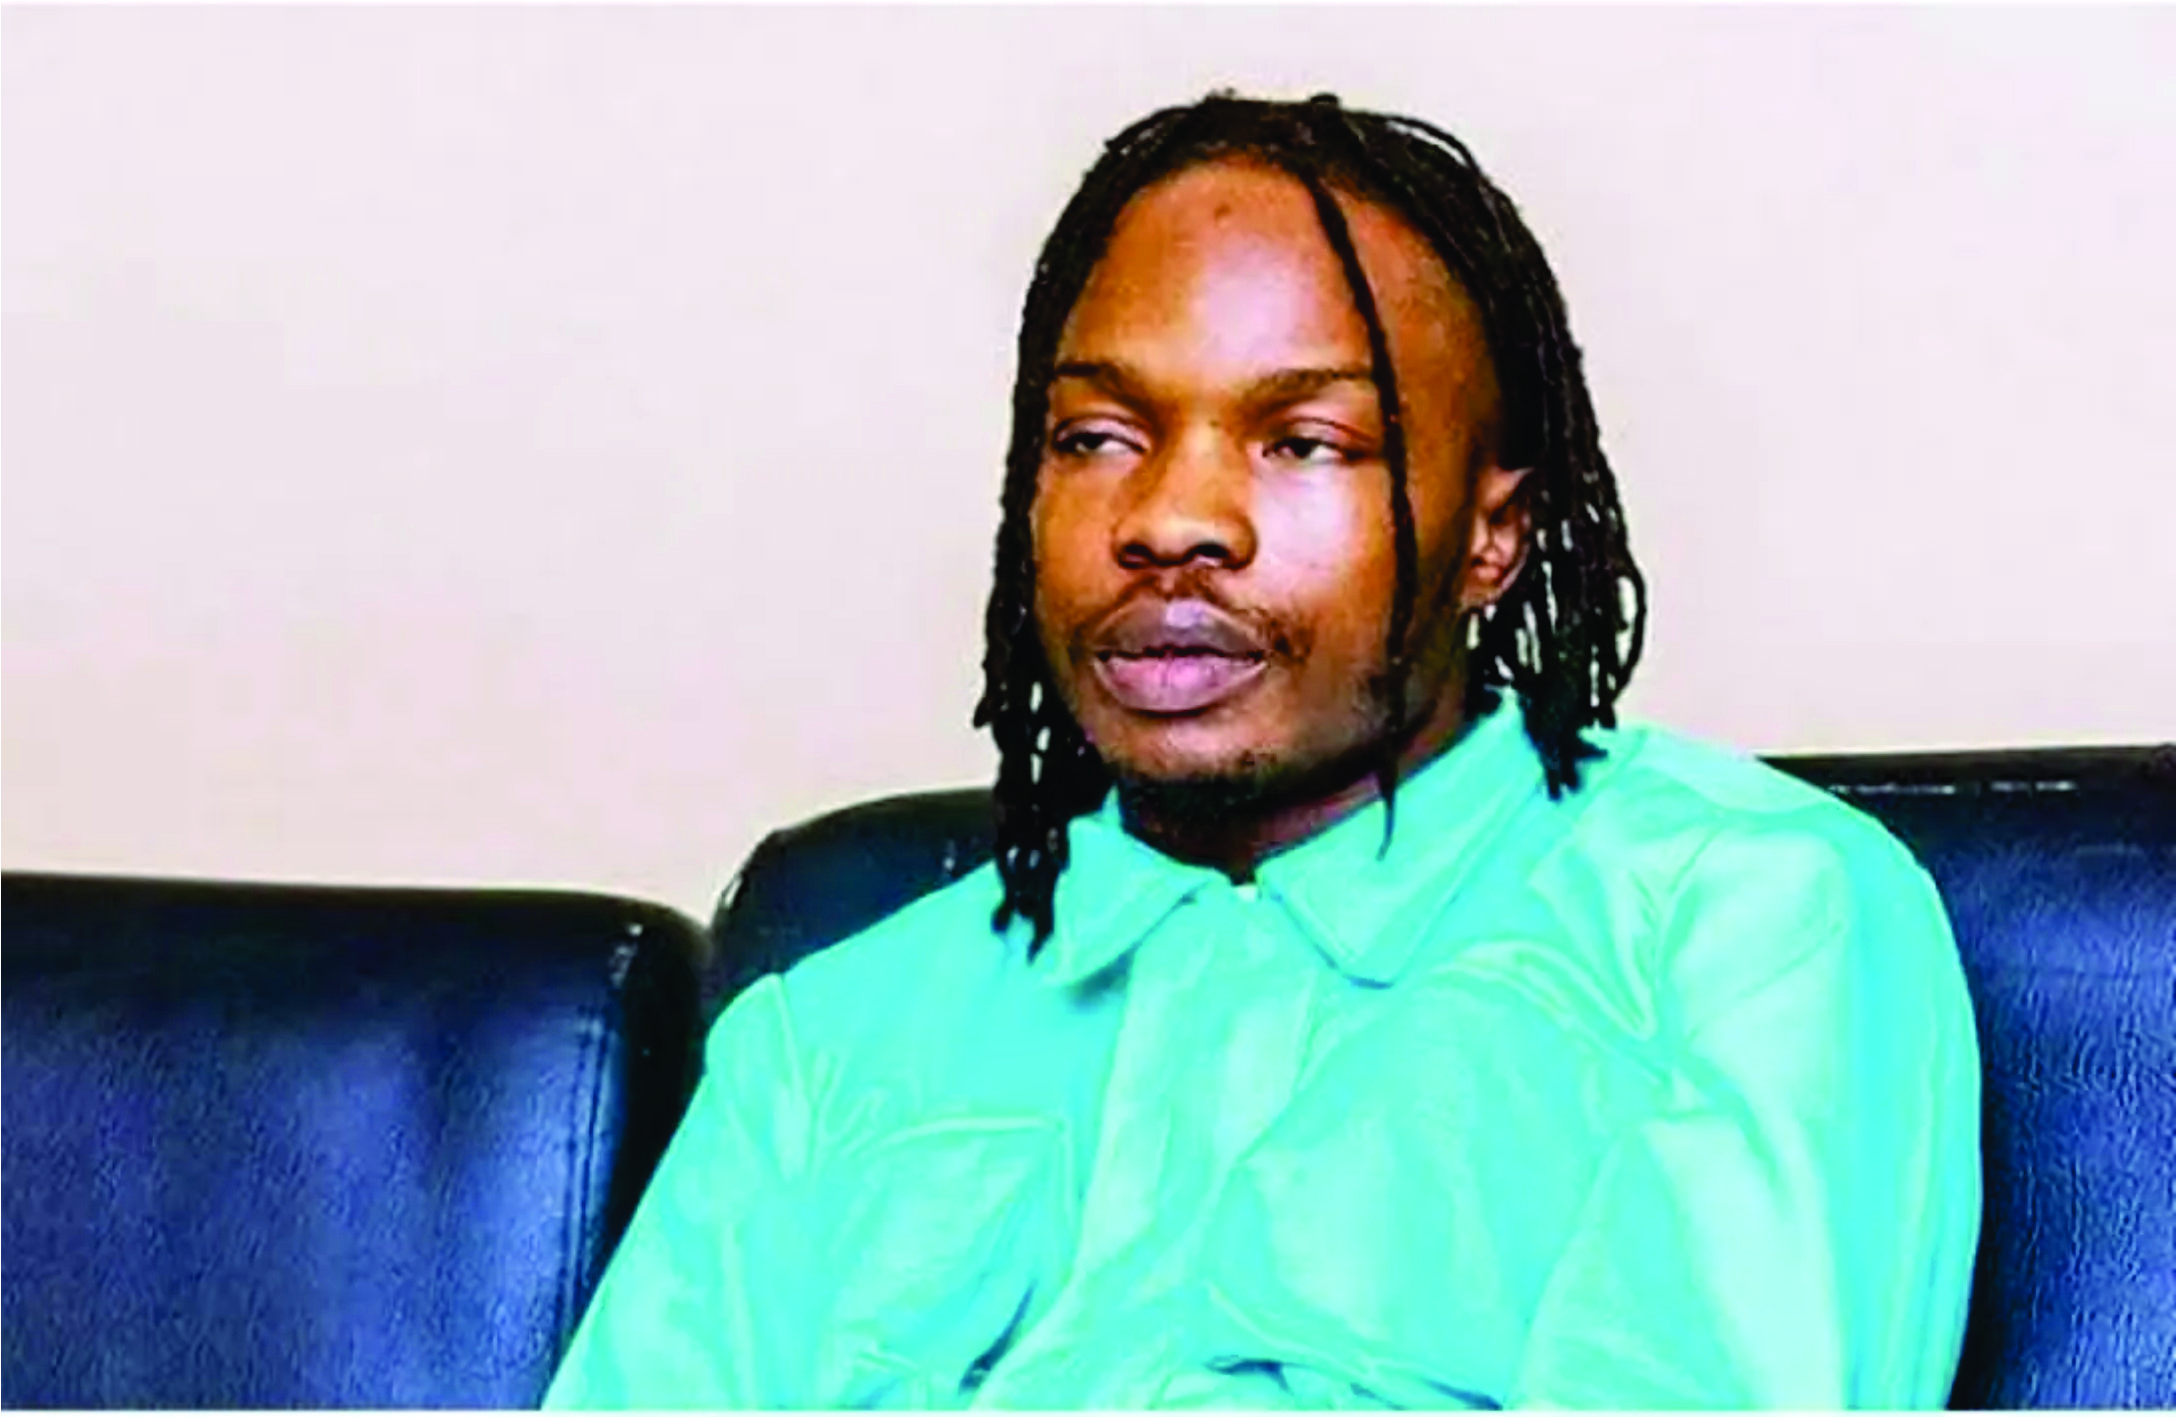 Mohbad: Council on Narcotics urges NDLEA to suspend Naira Marley as agency’s ambassador